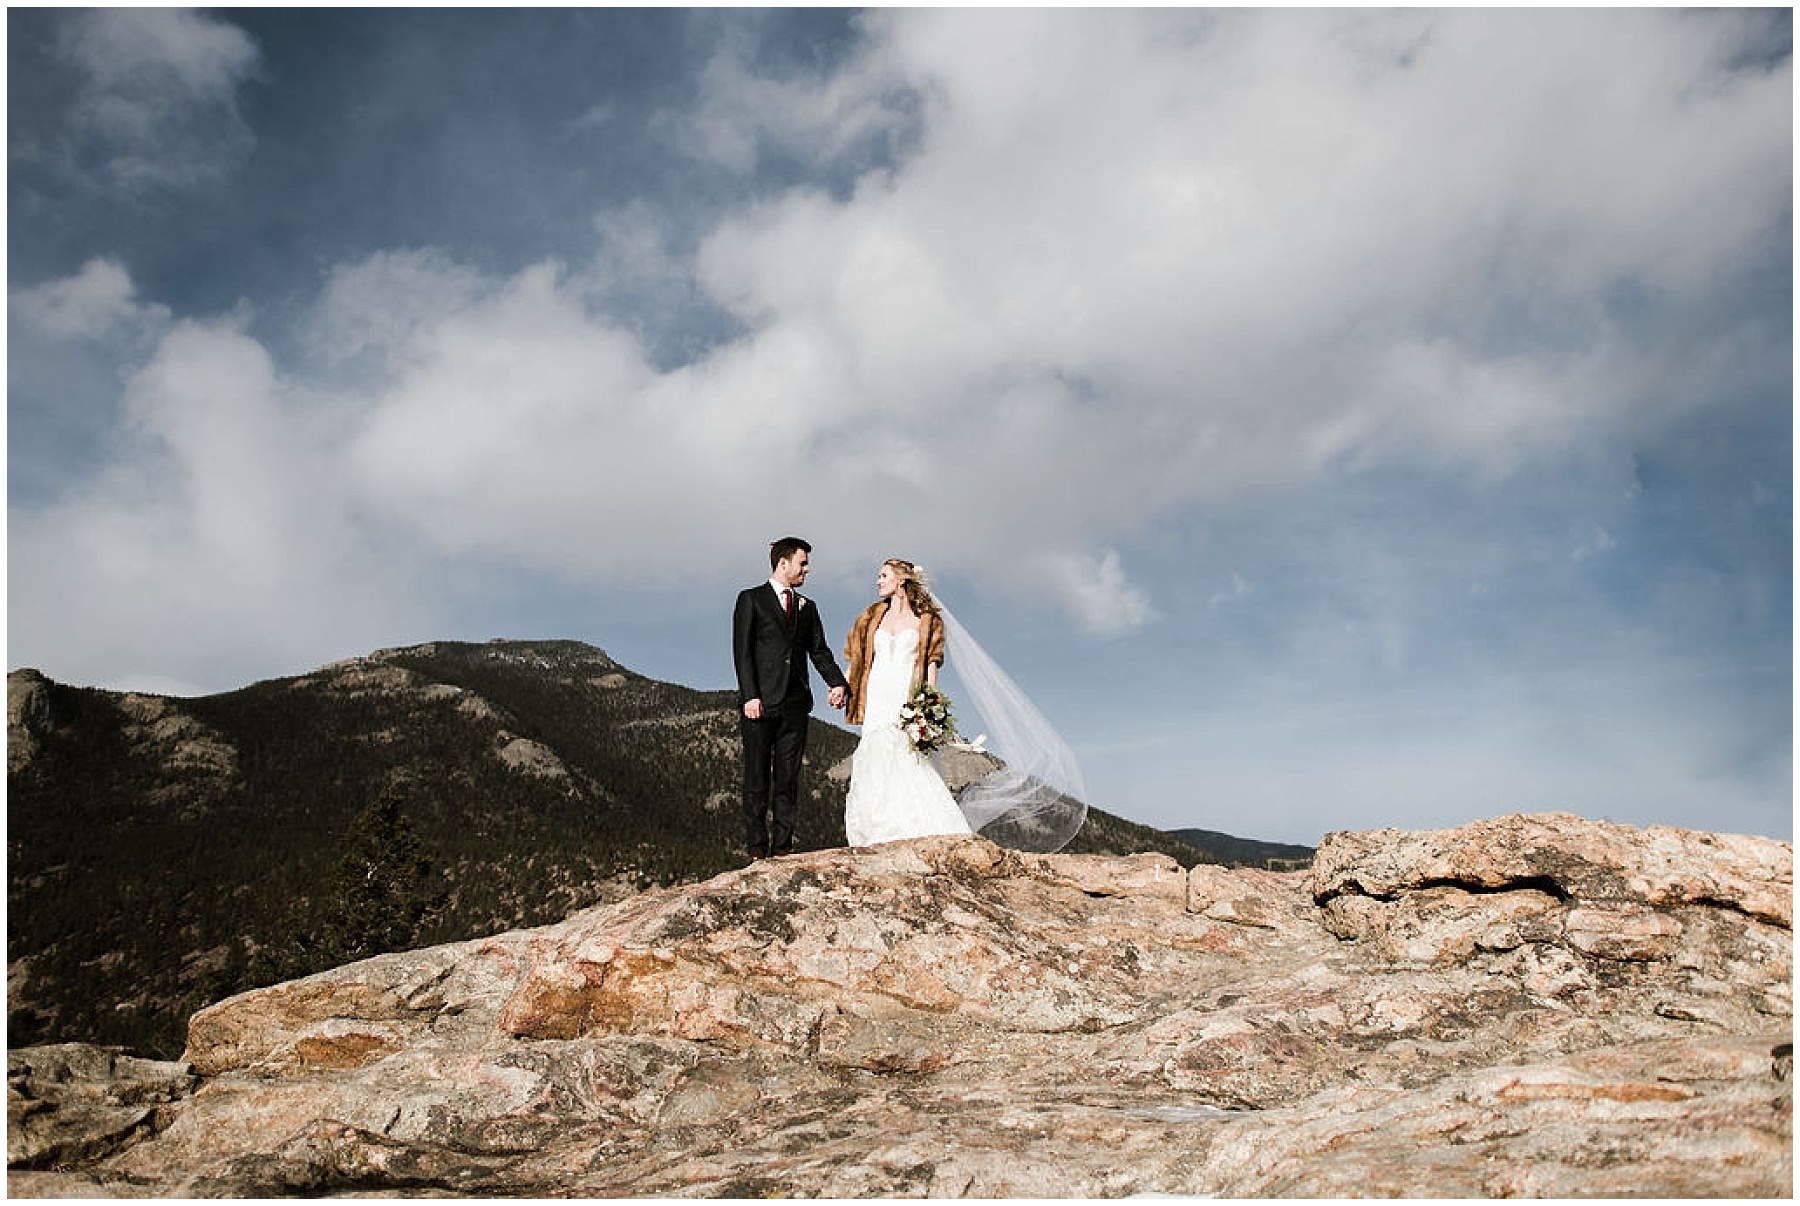 Katesalleyphotography-224_Haley and Dan get married in Estes Park.jpg